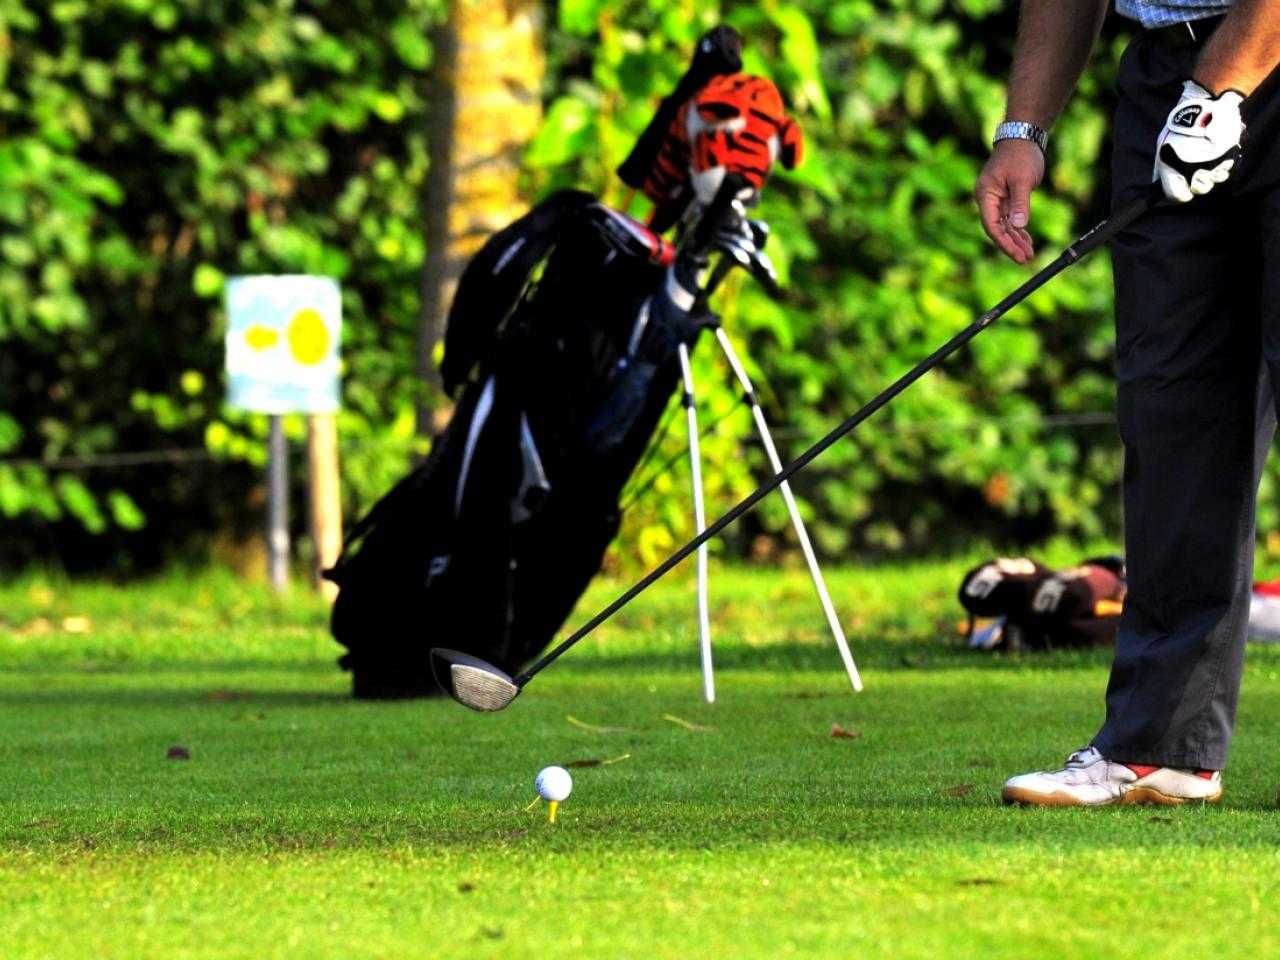 Golfer ready to hit with golf bag in the background